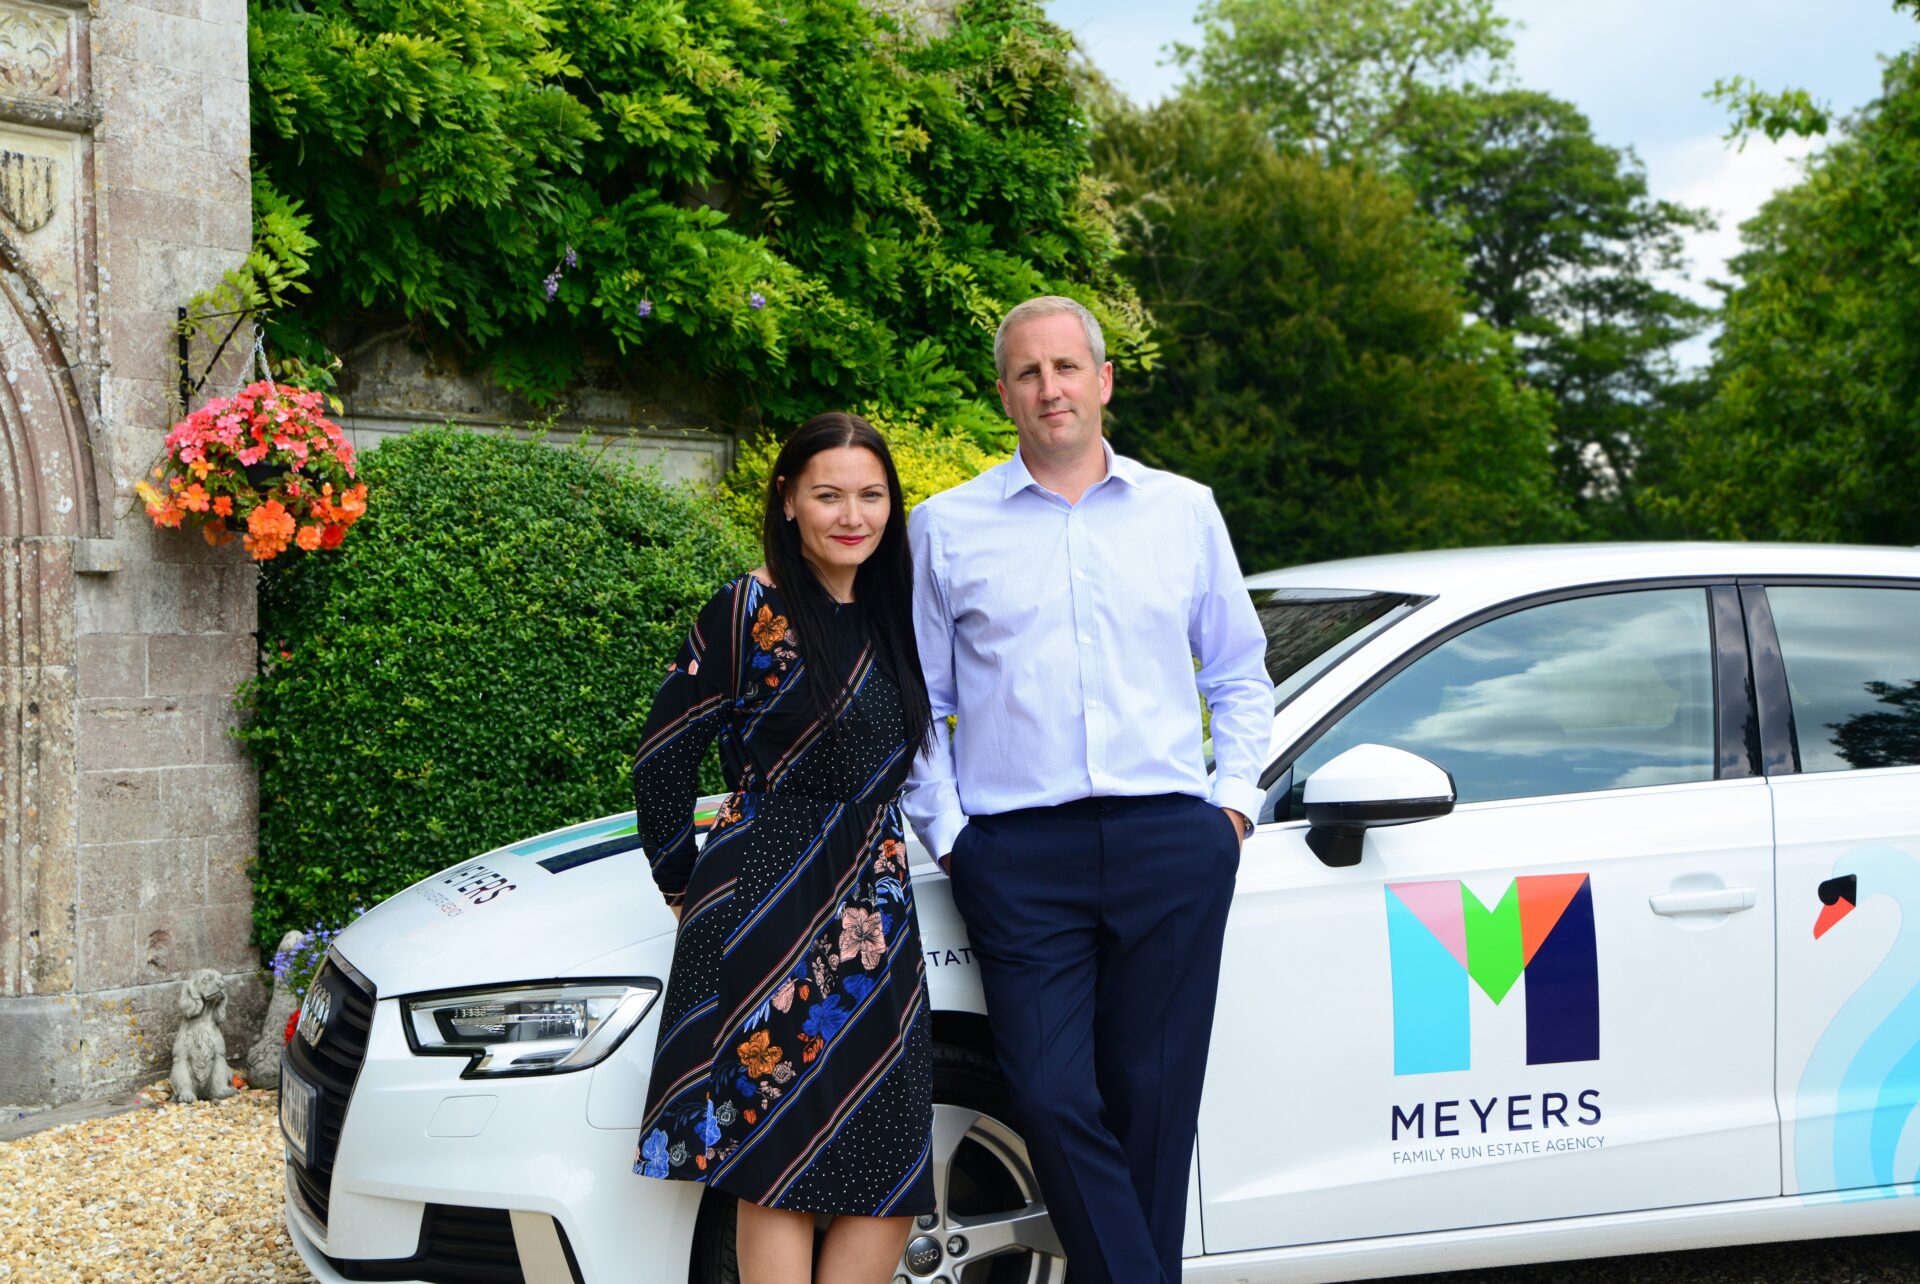 Meyers Estate Agents’ franchisees Richard White and his partner Claire - Q&amp;A UK Franchise Opportunities